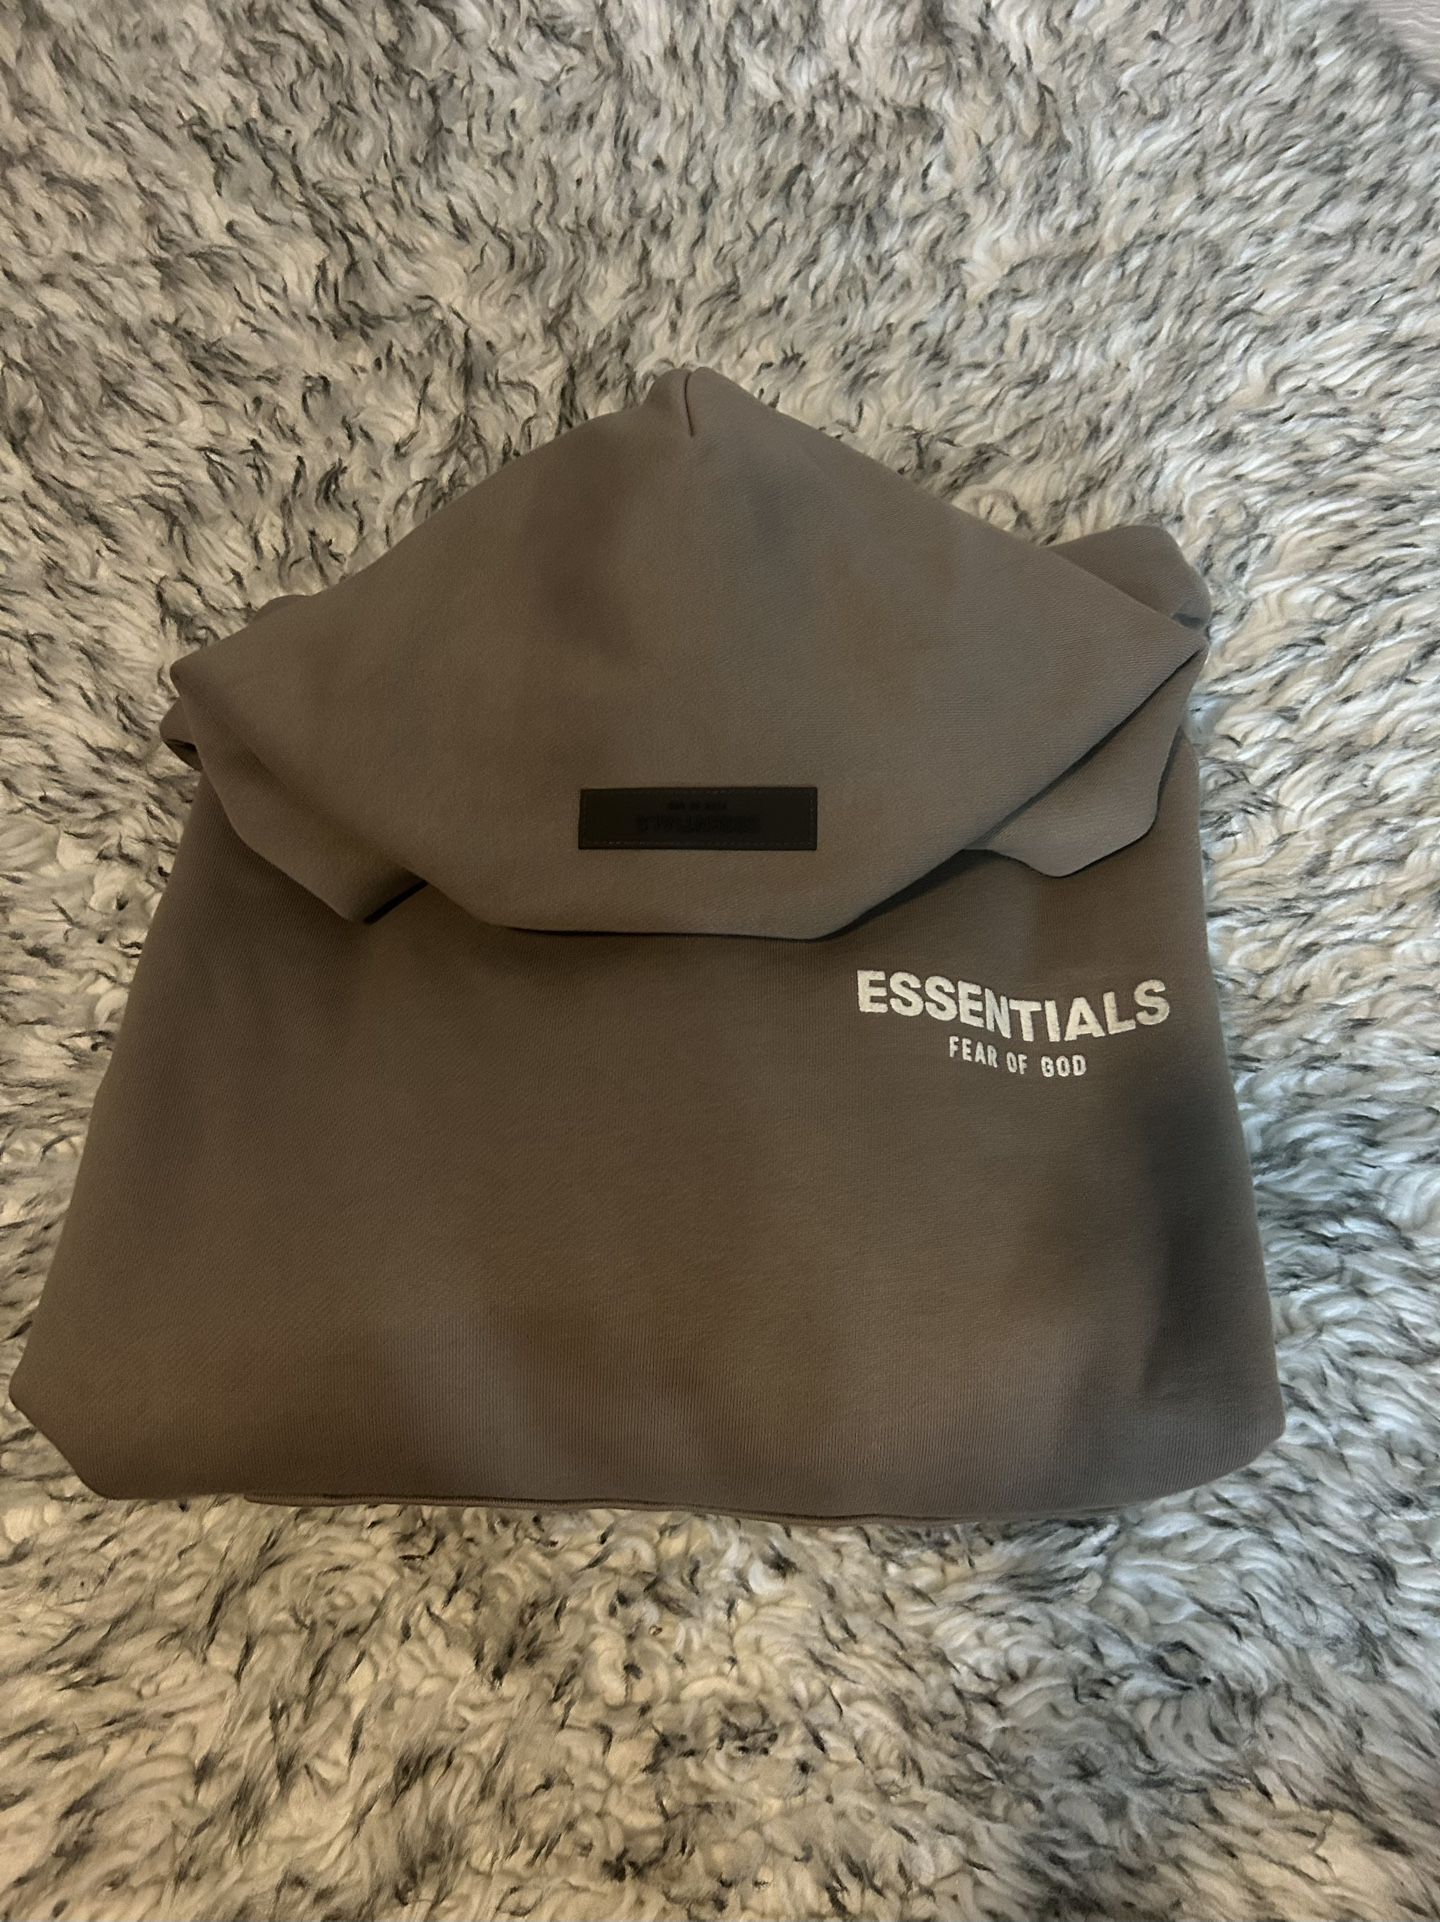 Fear of god essentials “Desert taupe” hoodie